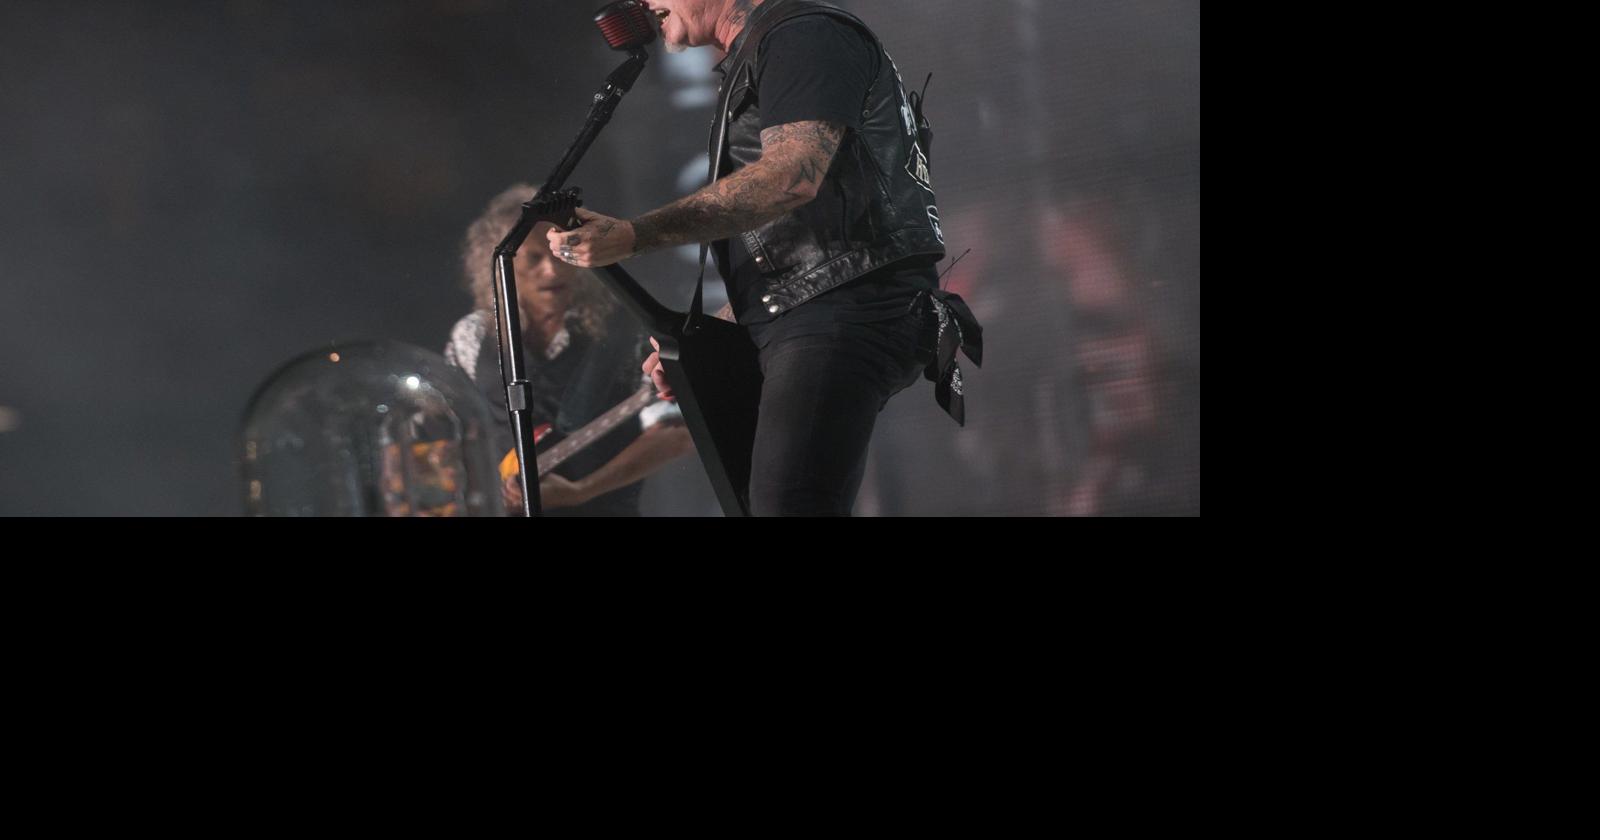 Official Metallica At Dome At America's Center In St. Louis, Mo, United  States On November 5